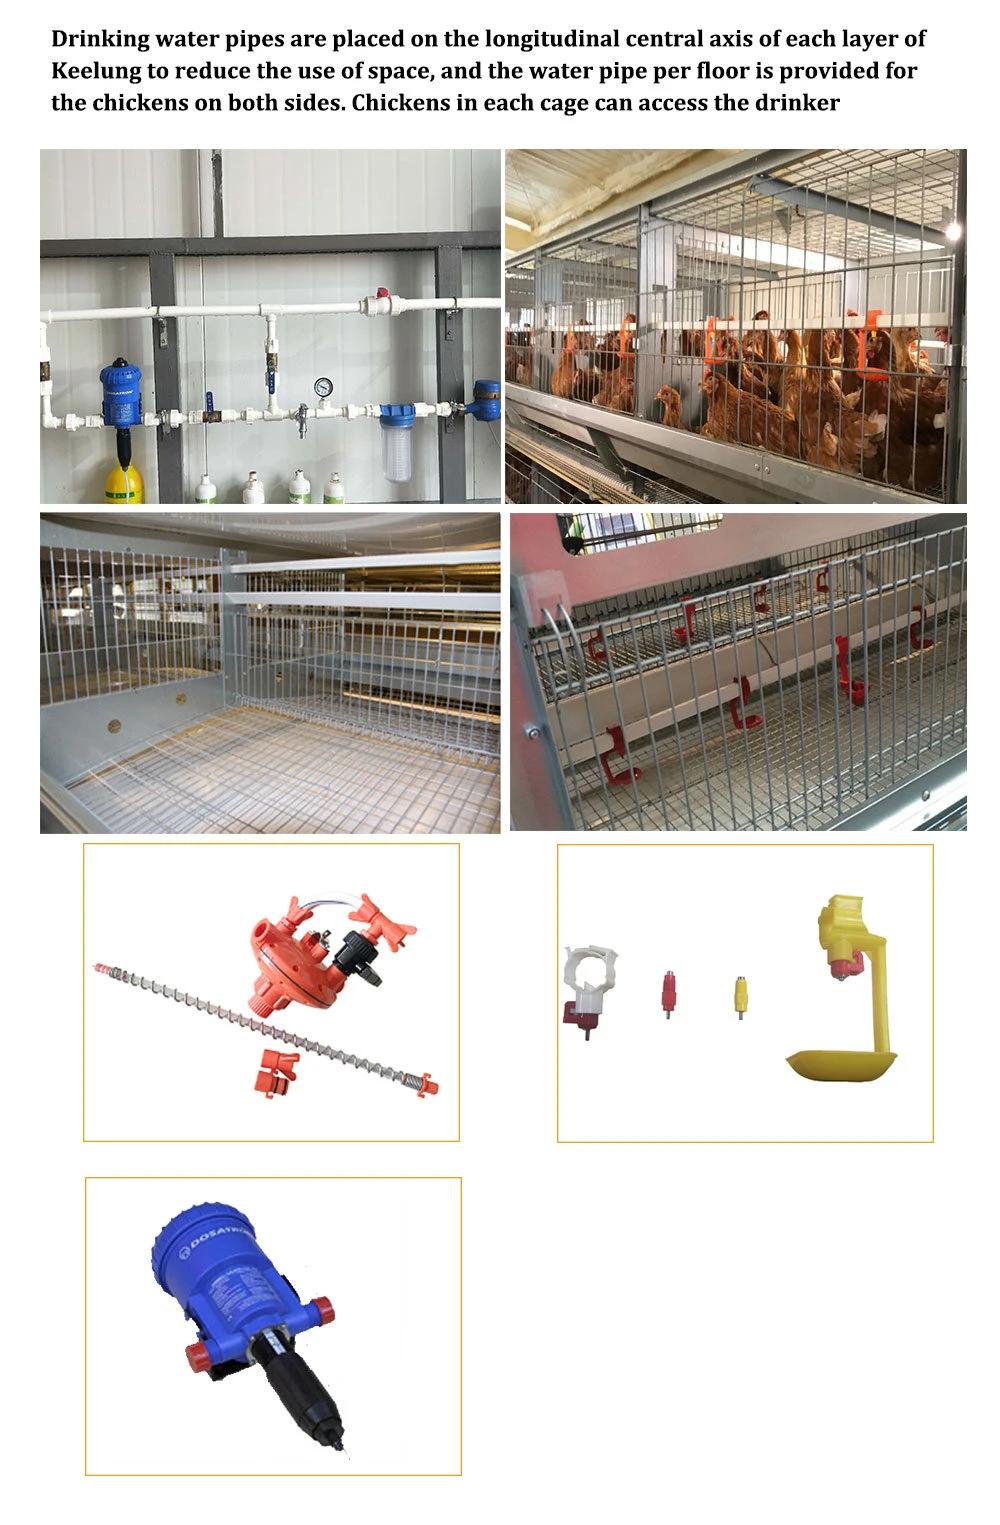 Quickly Built Easily Assemble Automatic Hot Sale Cage Feeding System